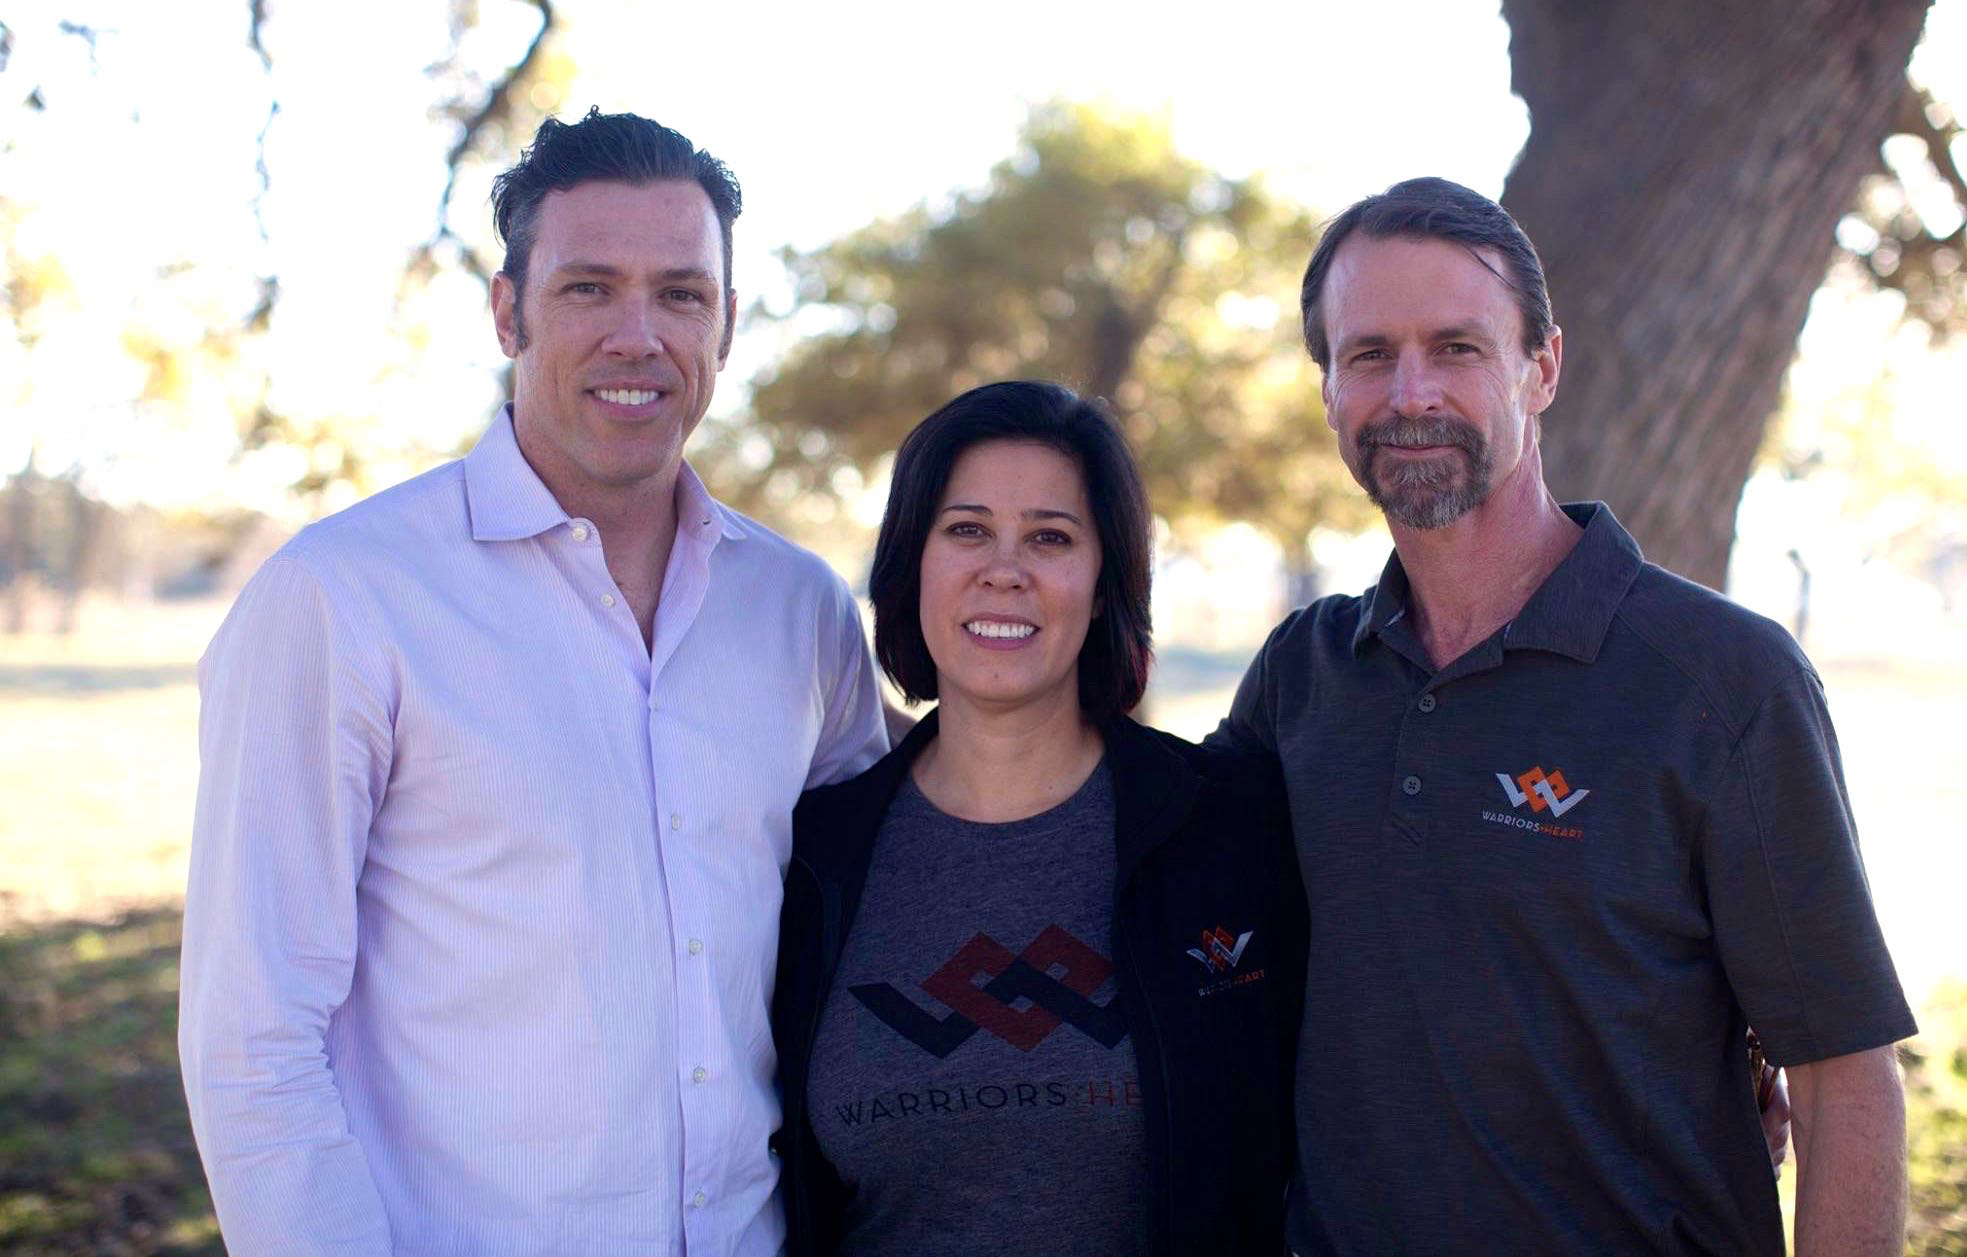 Warriors Heart Founders L to R: CEO/Founder Josh Lannon, Former Law Enforcement Officer Lisa Lannon and Former Delta Operator Tom Spooner.